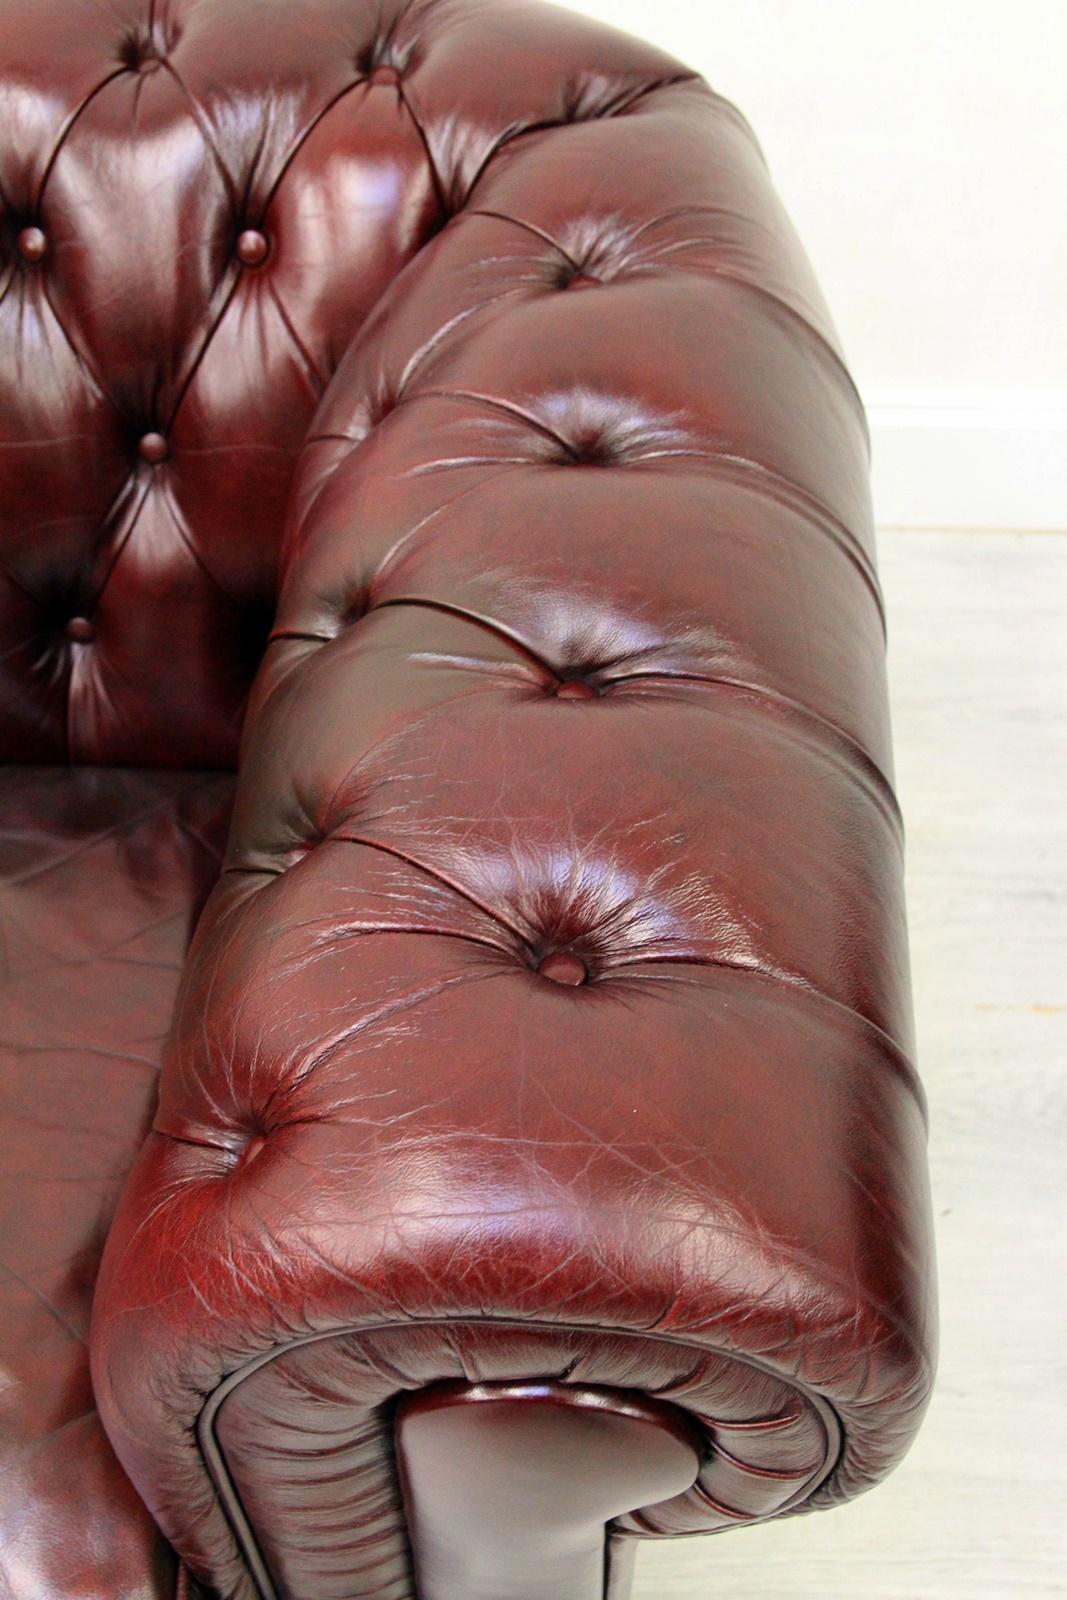 Chesterfield Sofa Leather Antique Vintage Couch English Chippendale In Good Condition For Sale In Lage, DE